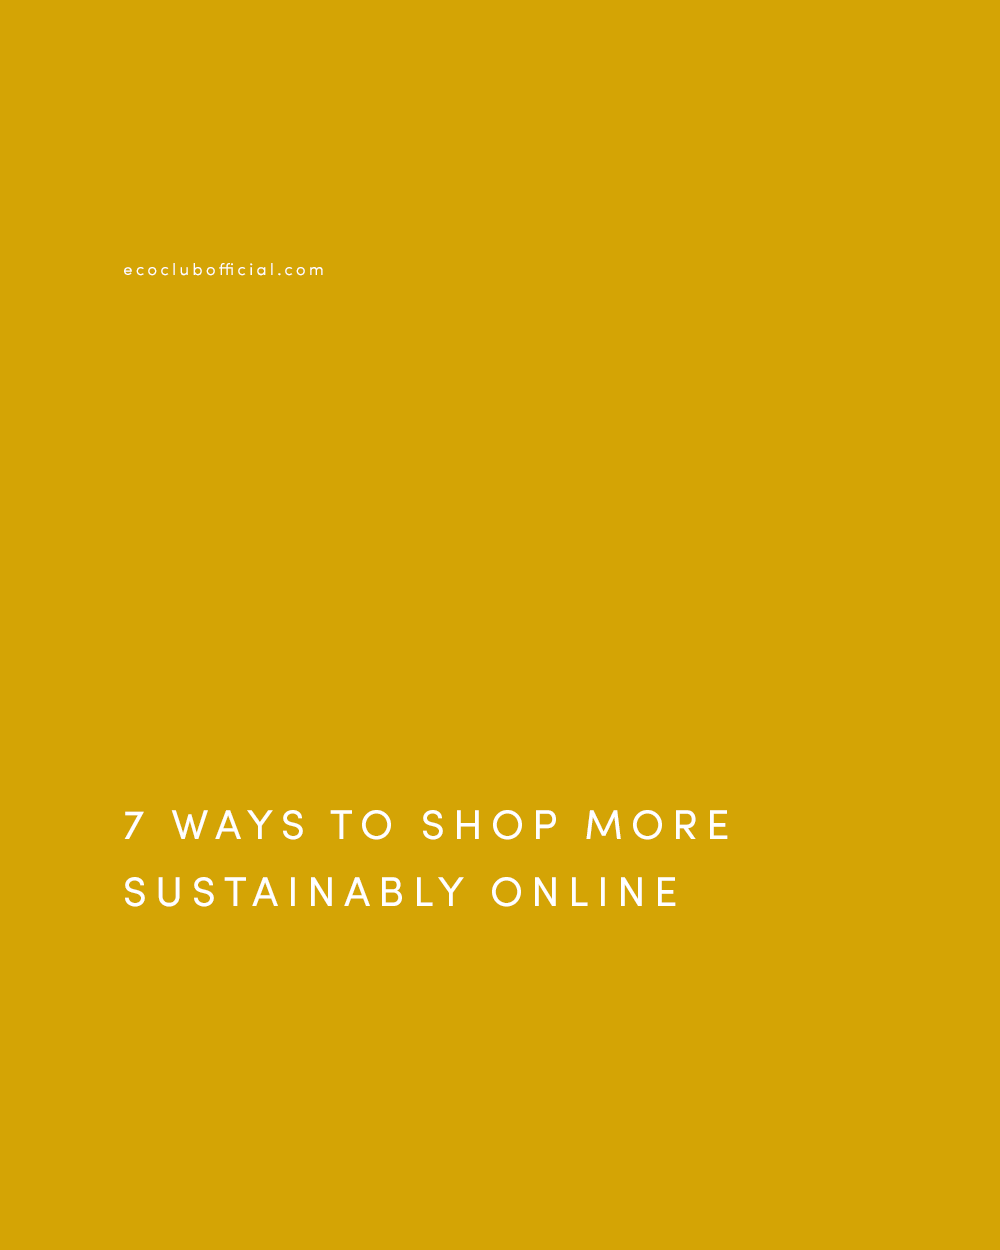 how to shop more sustainably online - via eco club